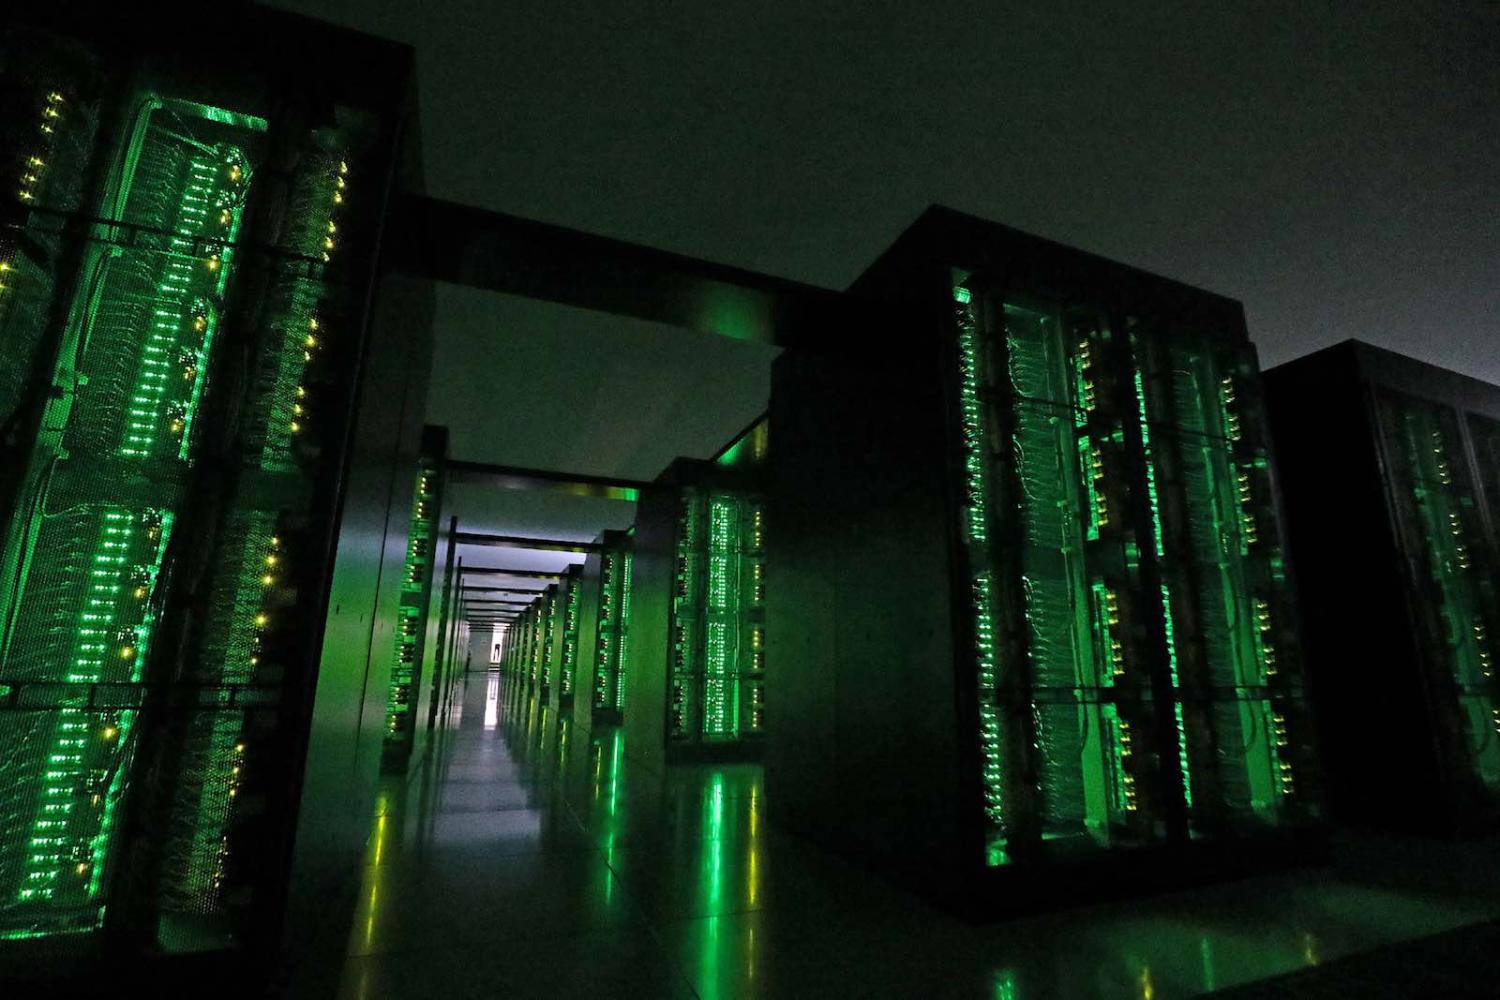 Japan’s Fugaku supercomputer at the Riken Center for Computational Science in Kobe (STR via Getty Images)